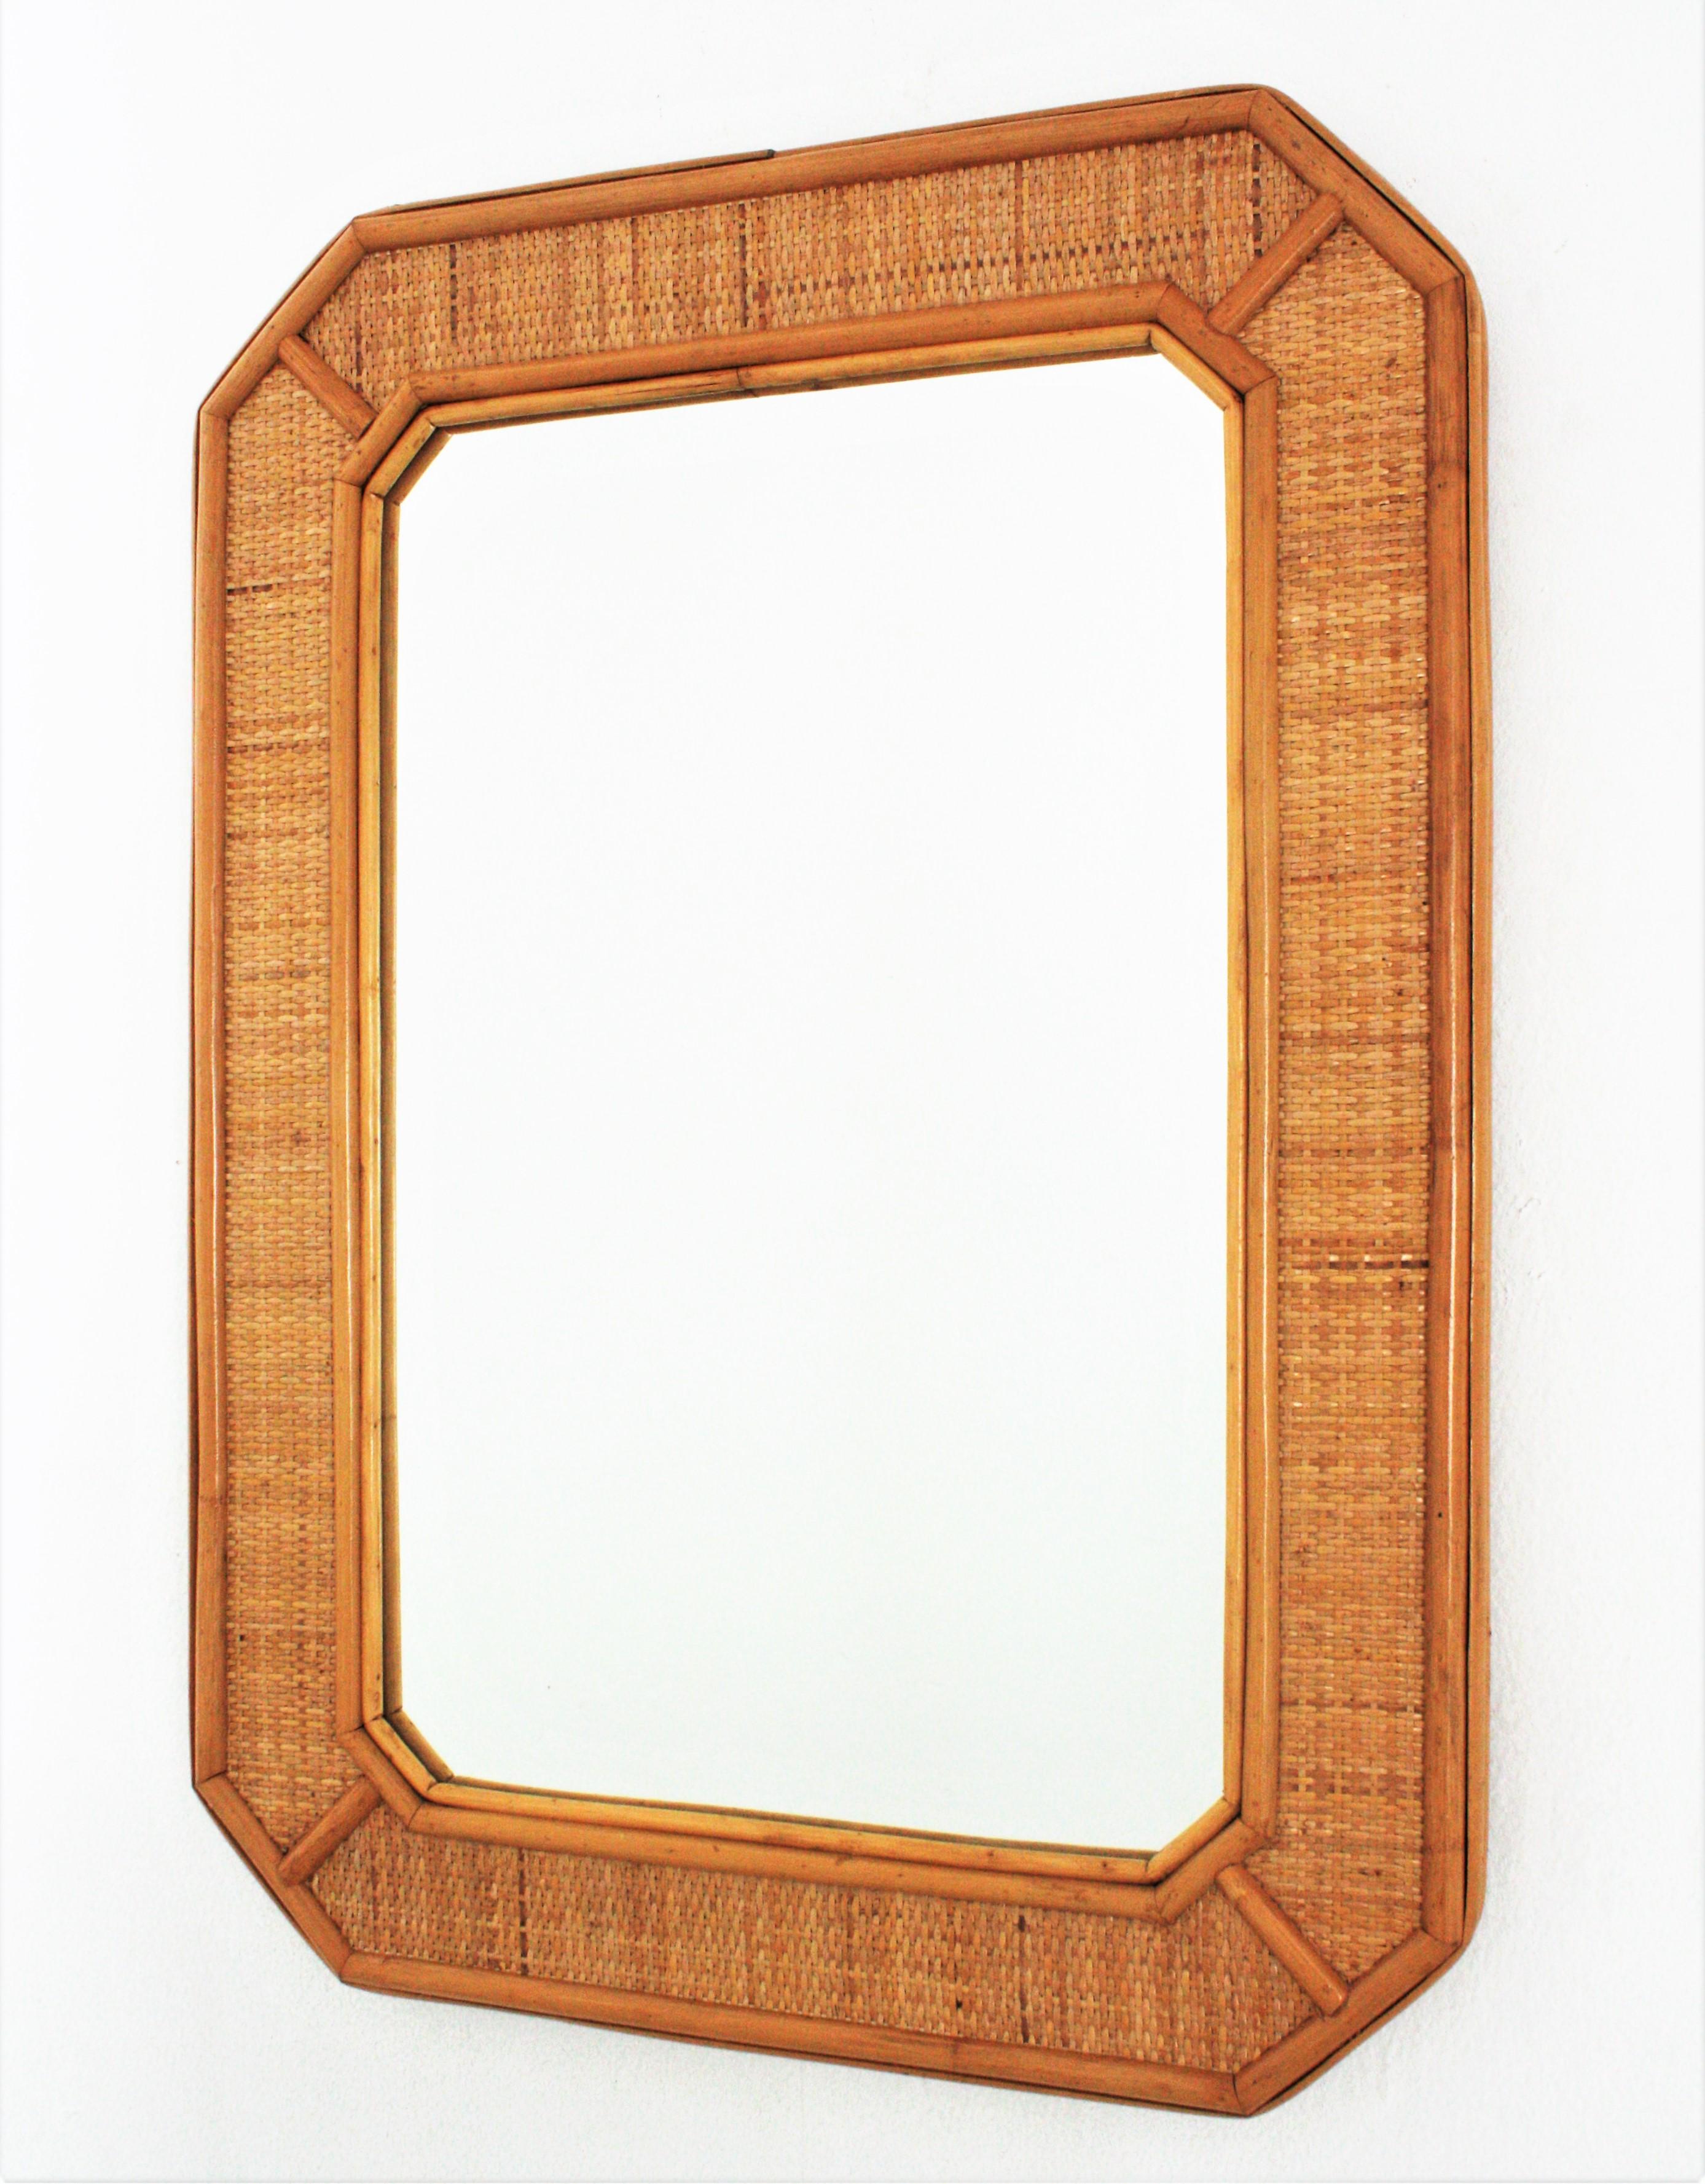 Hand-Crafted Octagonal Wall Mirror in Rattan and Woven Wicker For Sale